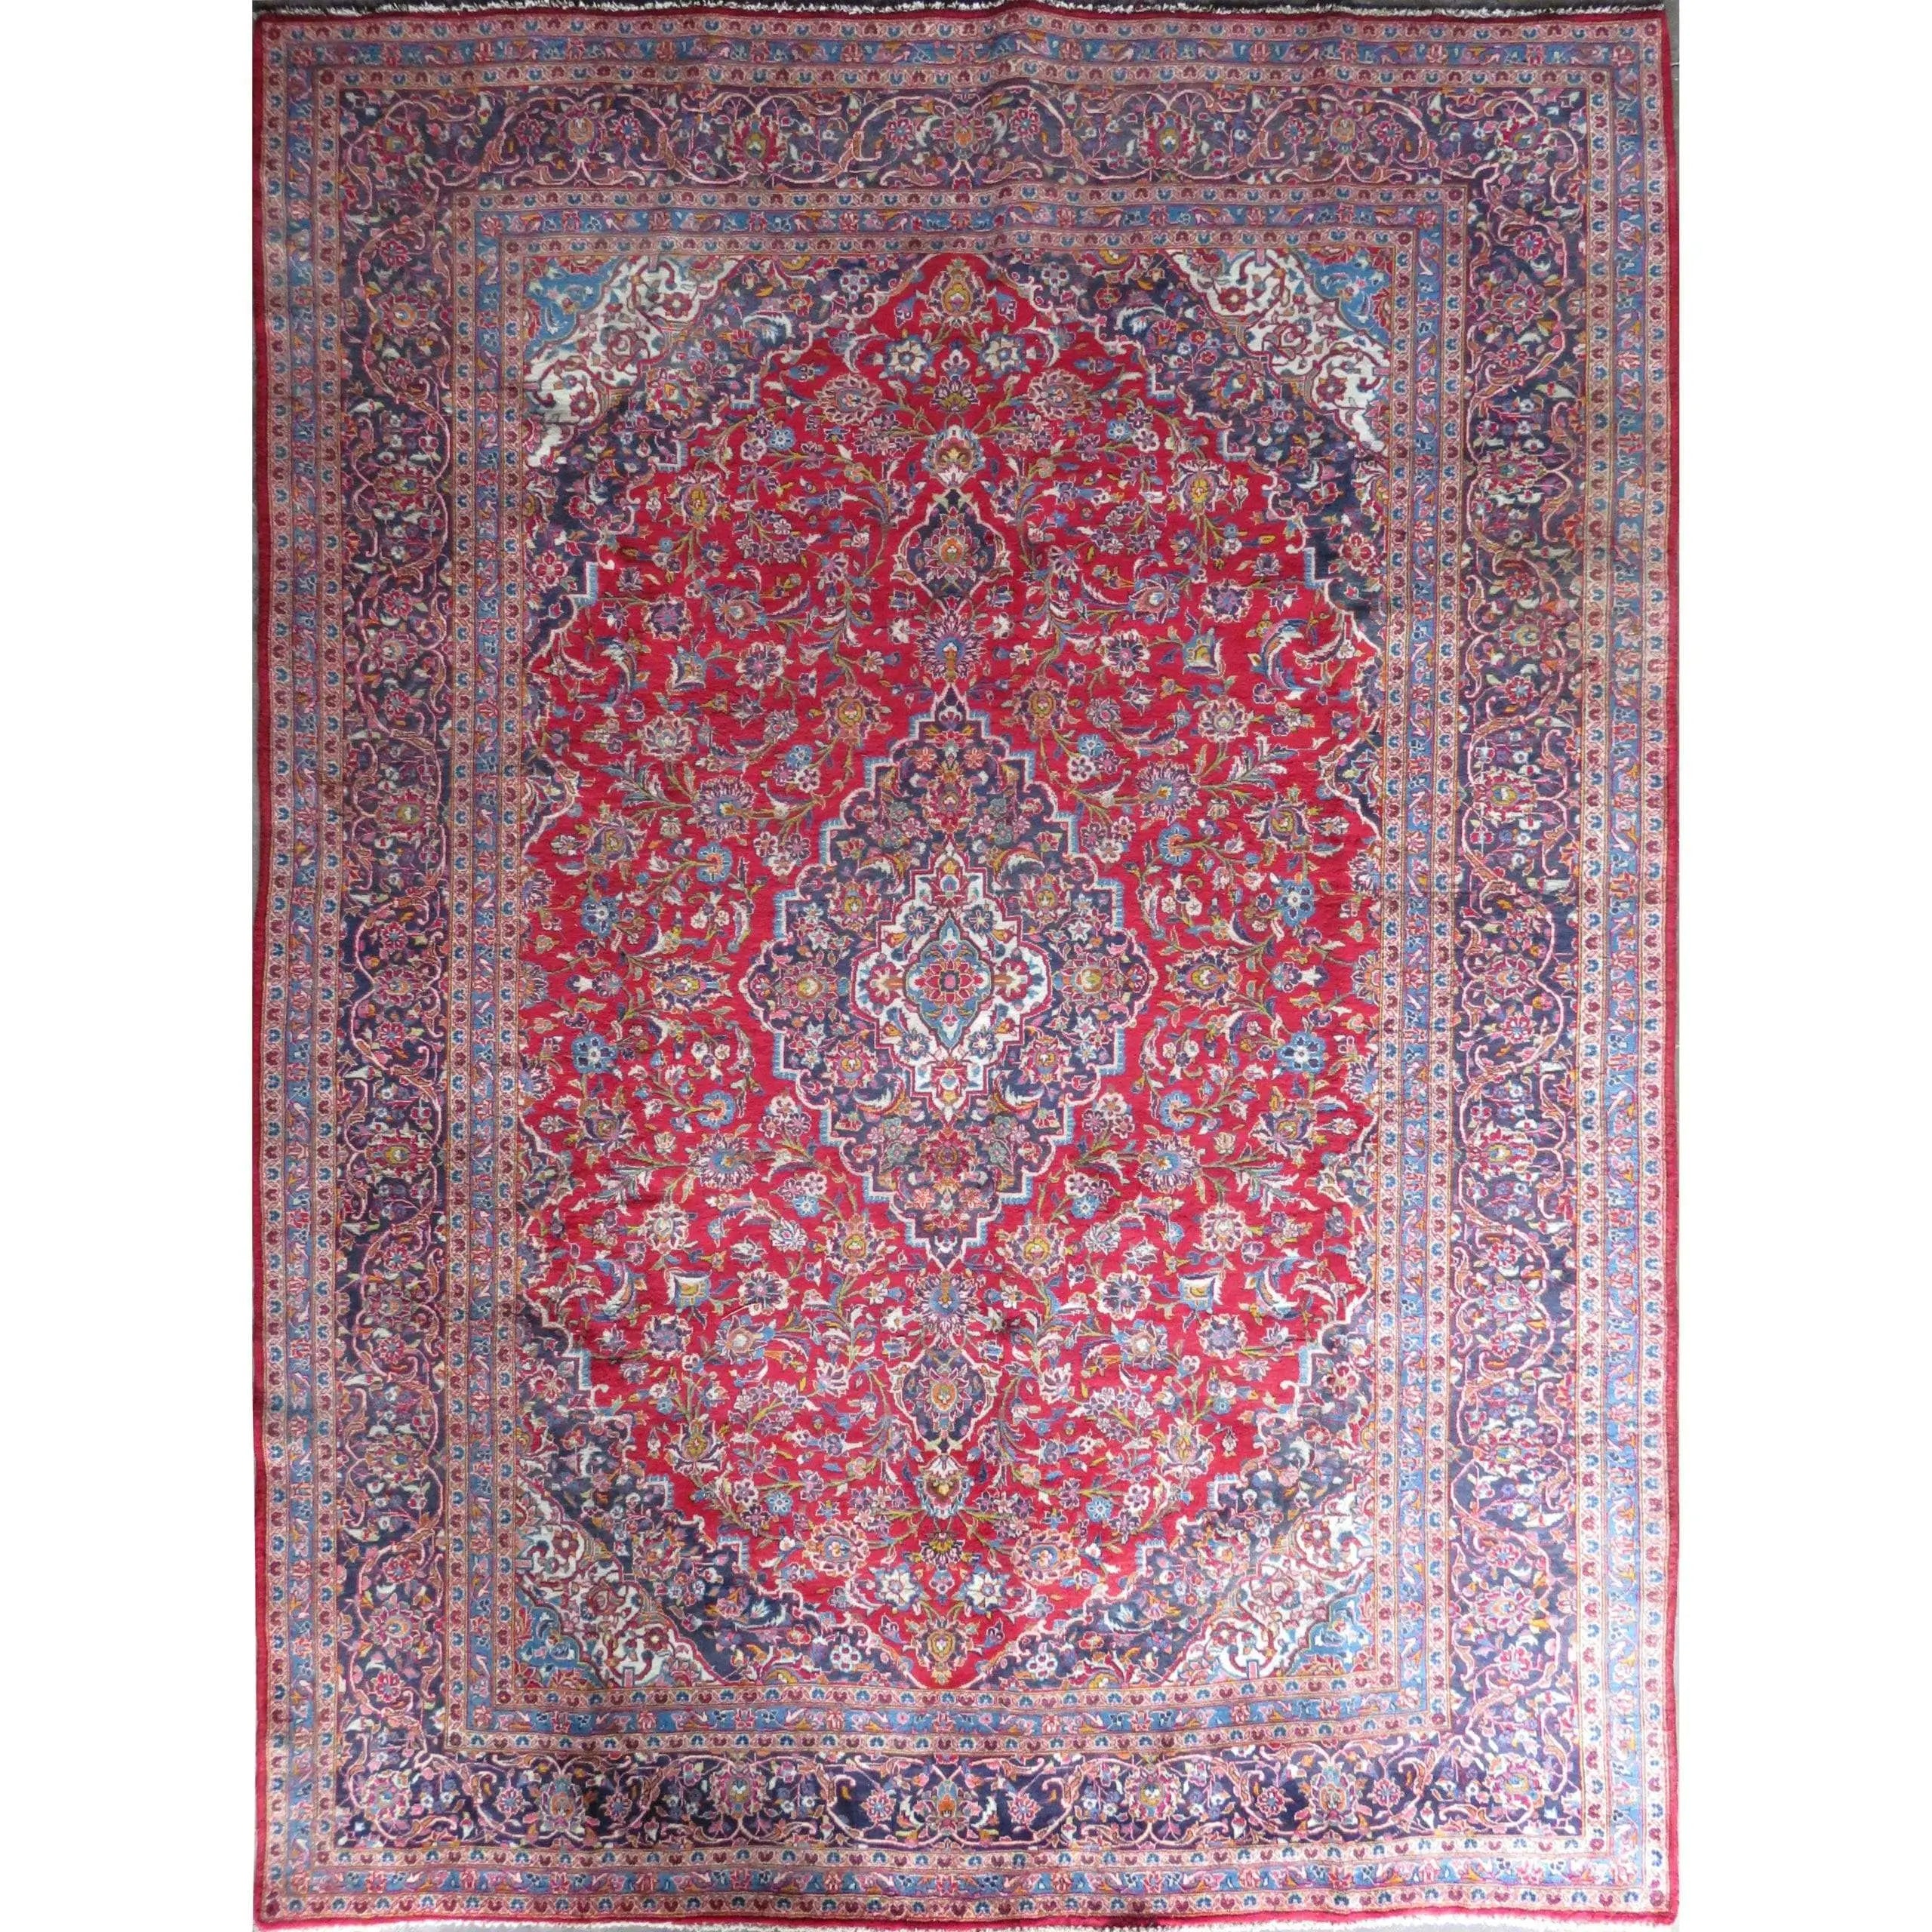 Hand-Knotted Persian Wool Rug _ Luxurious Vintage Design, 12'8" X 9'5", Artisan Crafted